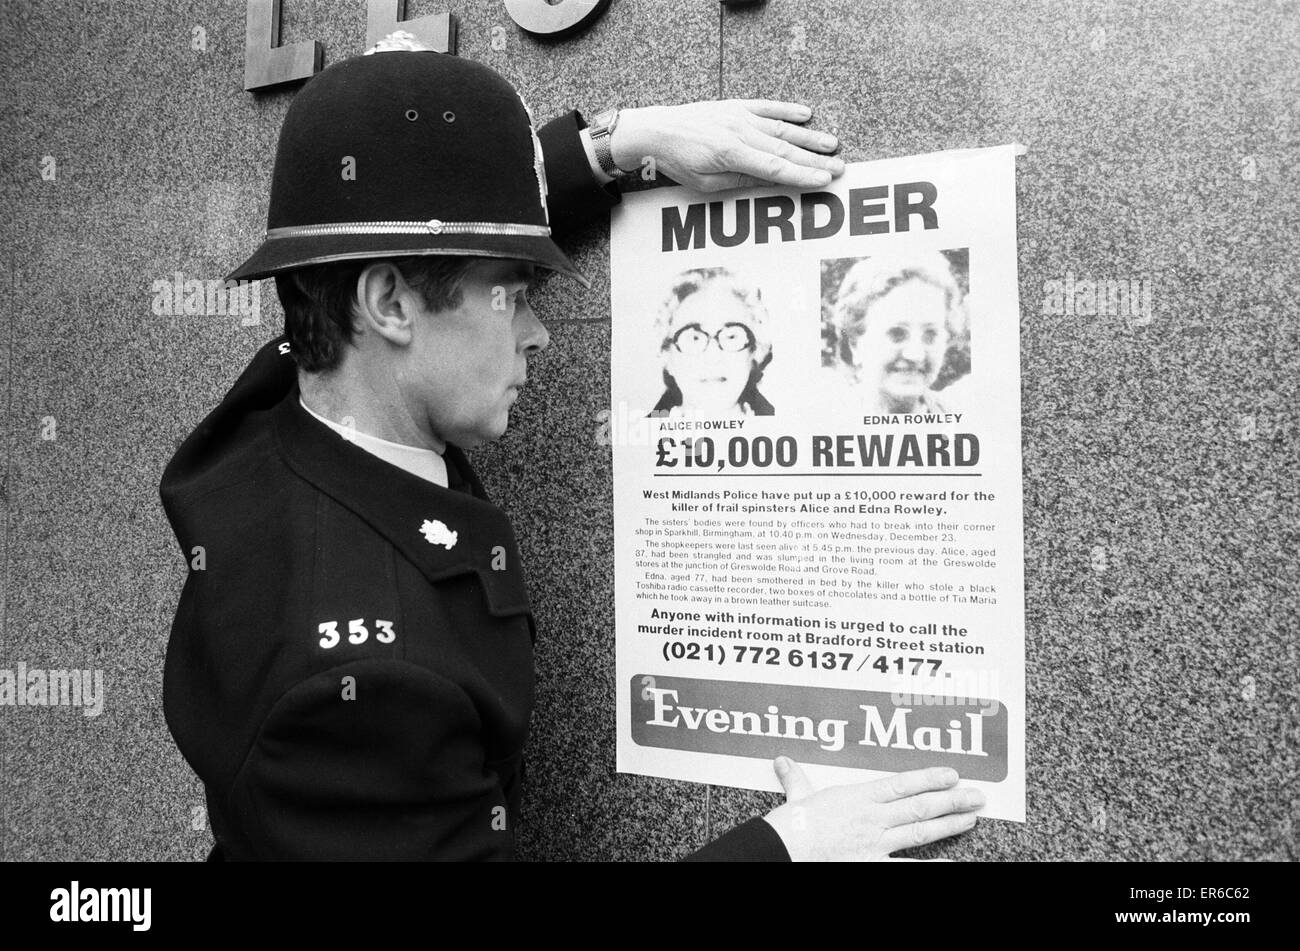 A police constable seen putting up a poster appealing for information in the Alice and Edna Rowley double murder in Sparkhill, outside Lloyds Bank in Sparkhill 5th January 1988 Stock Photo